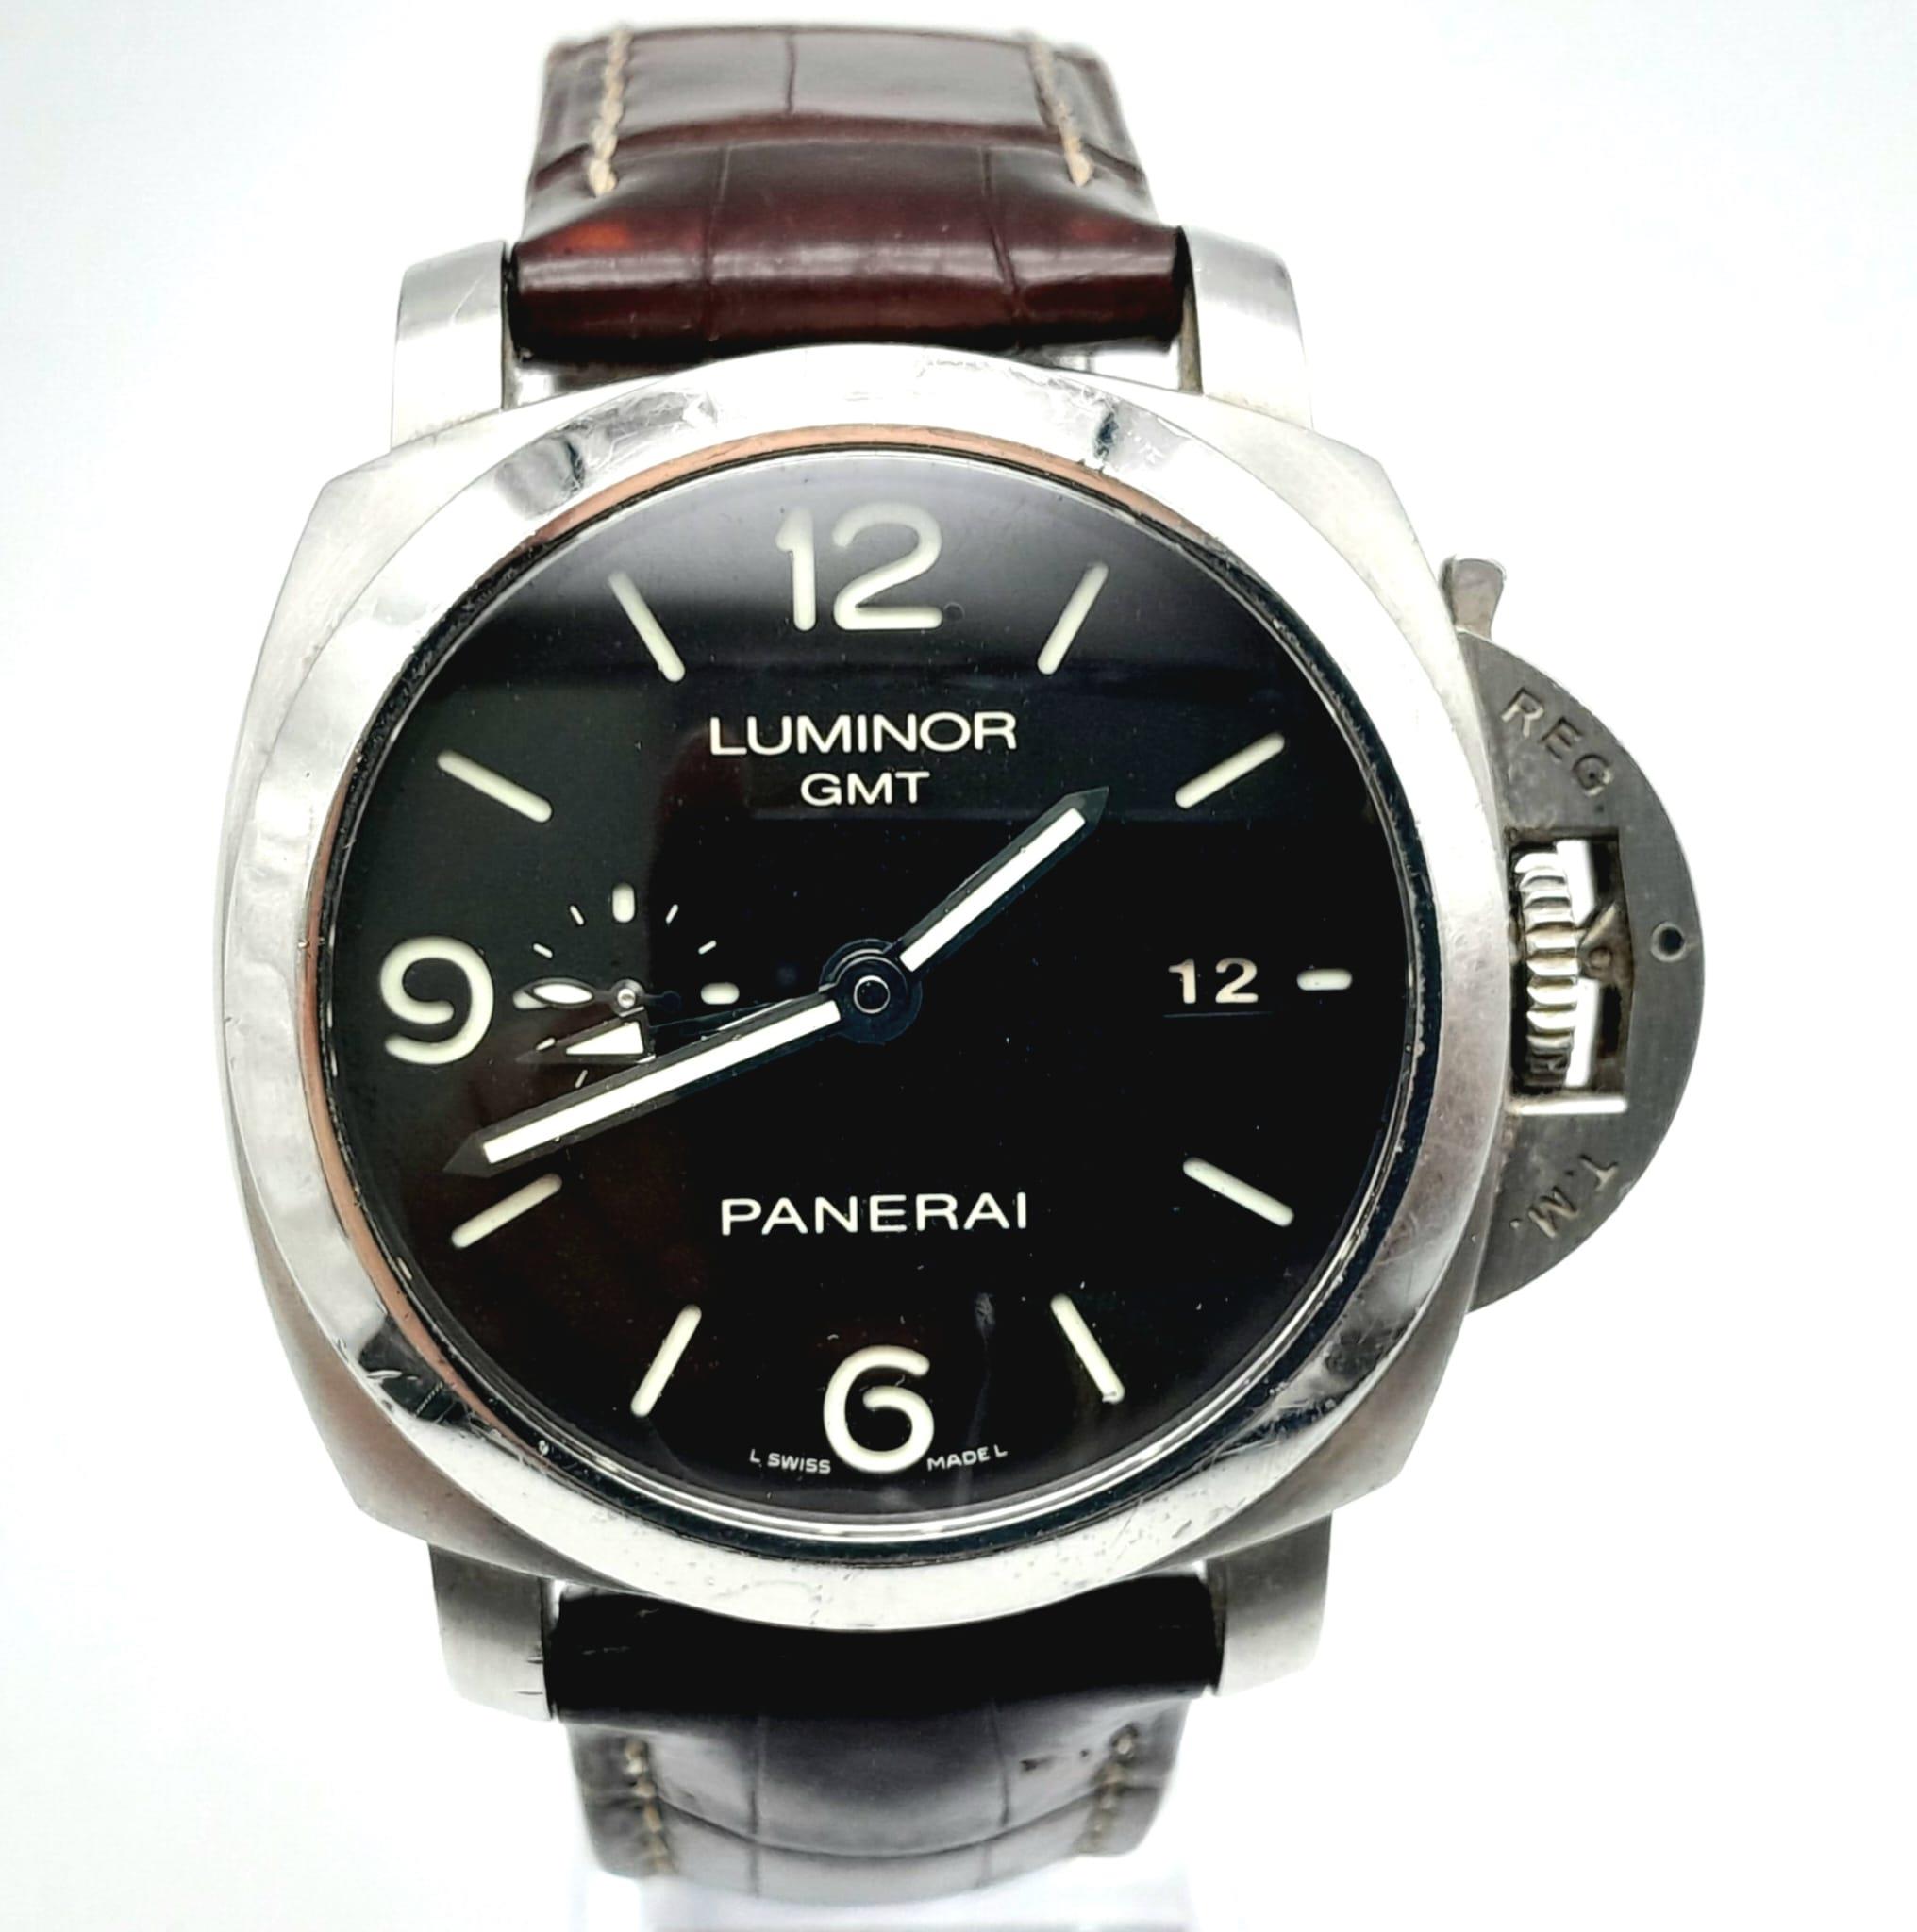 A "PANERAI LUMINOR GMT" WITH SKELETON BACK IN STAINLESS STEEL, A VERY SOUGHT AFTER PRESTIGE WATCH!